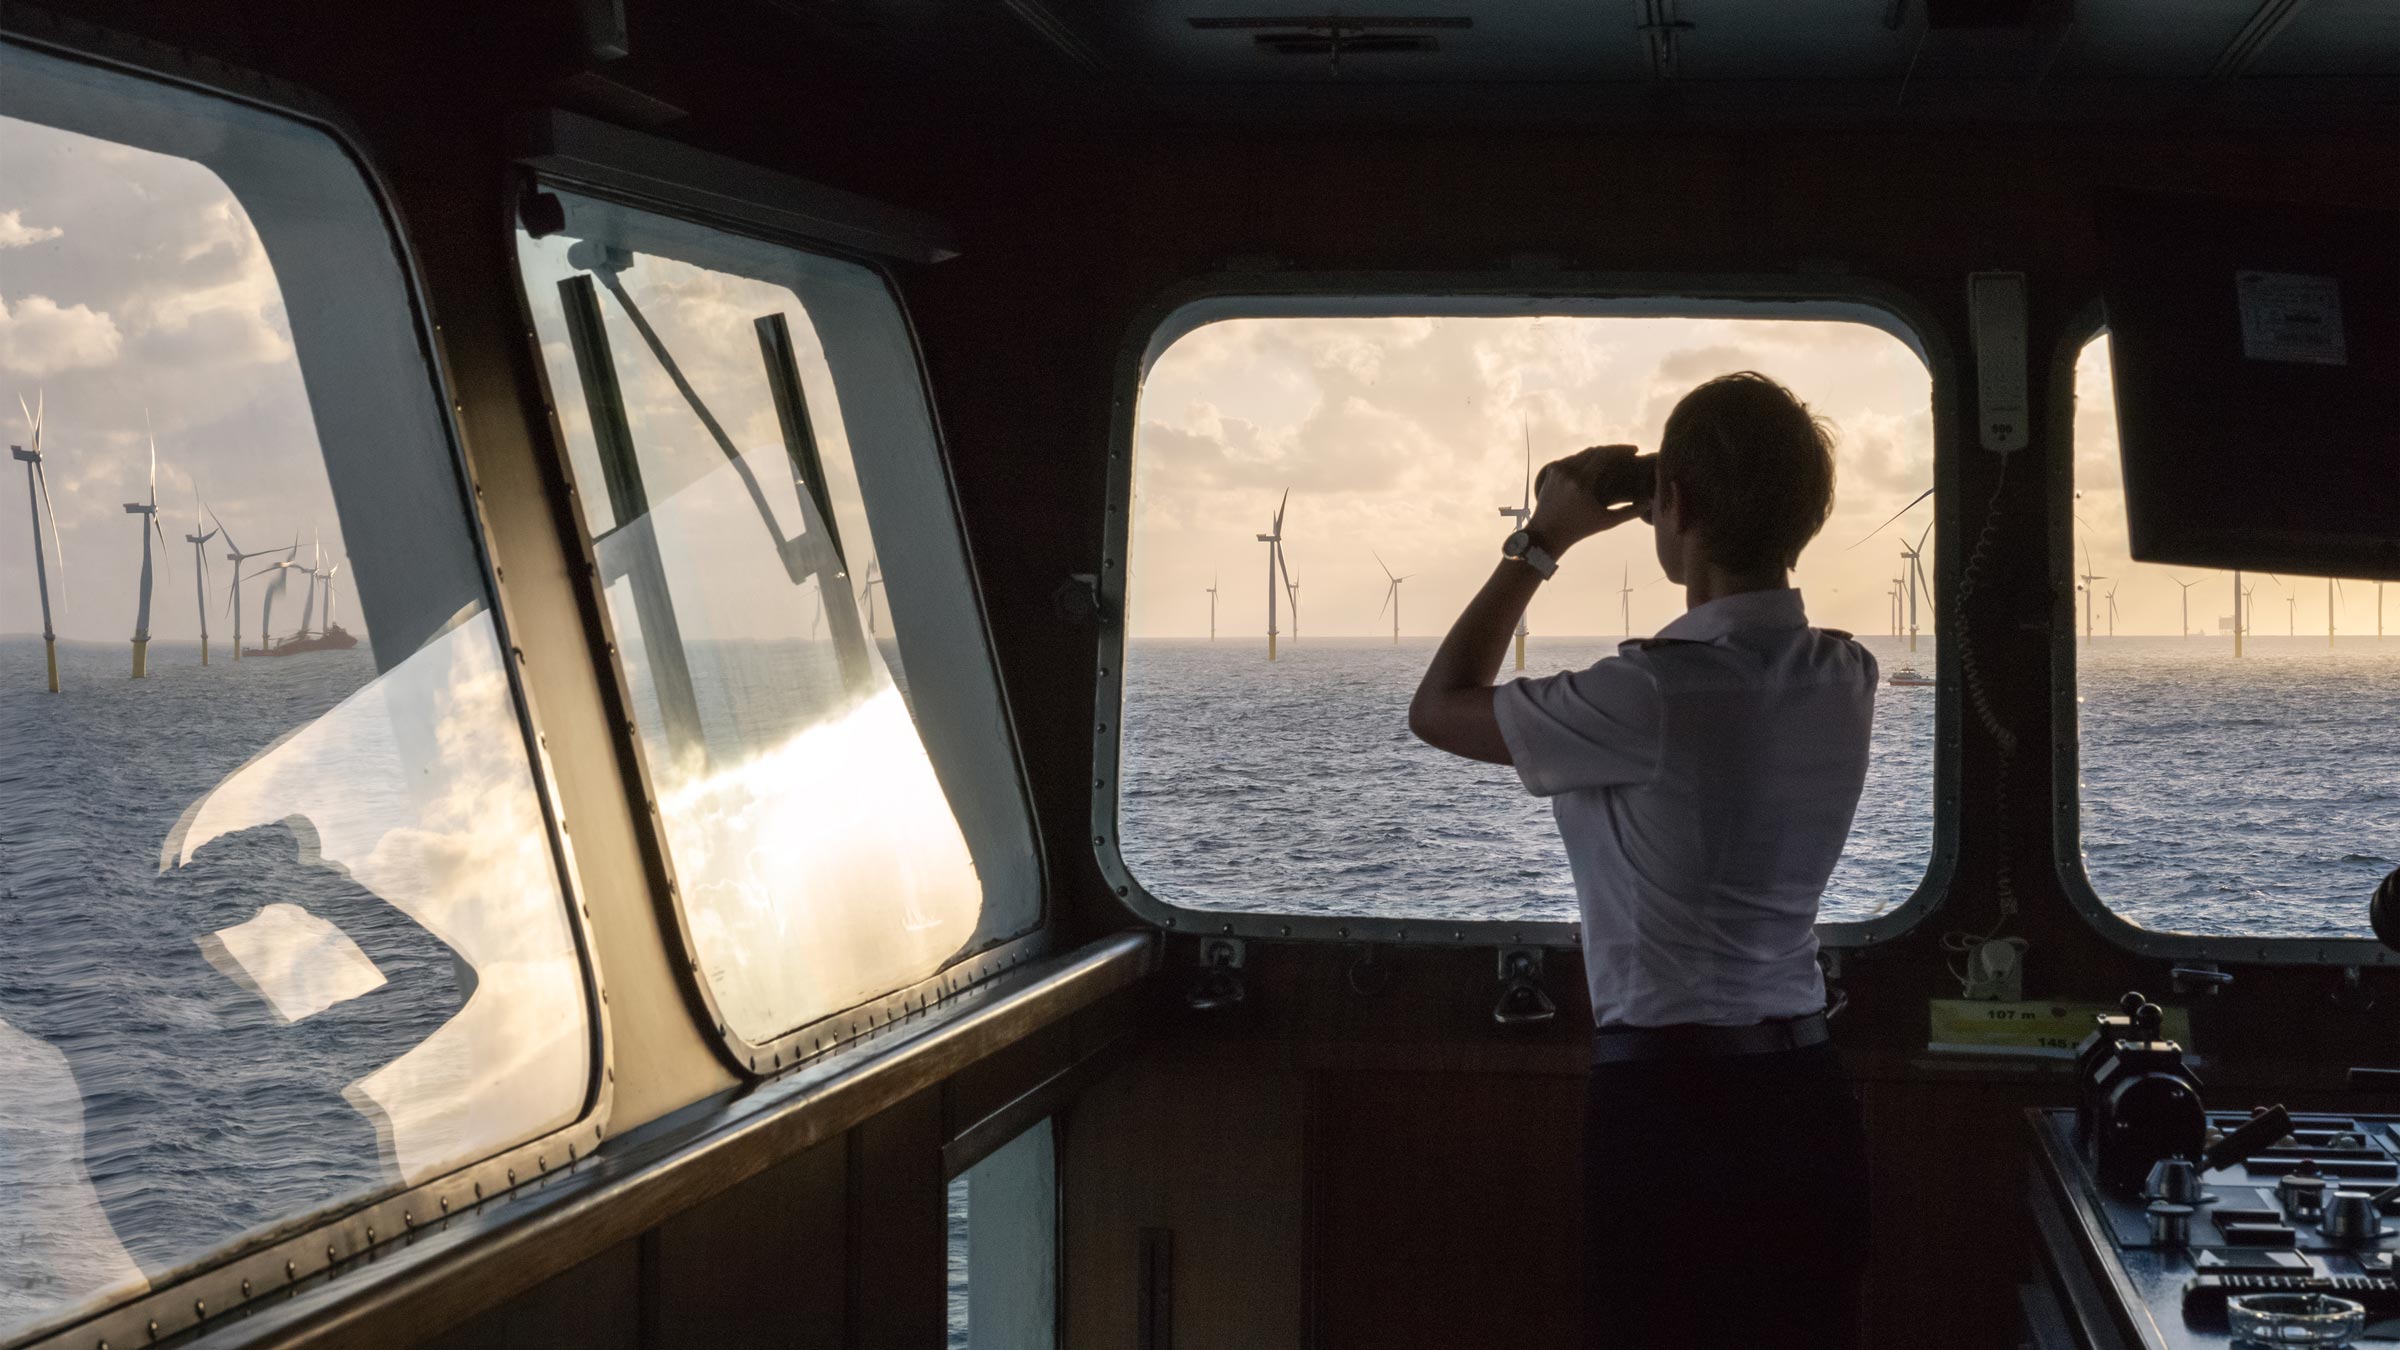 Luca Locatelli, Energiewende — Regina Baltica. Germany, 2015. Regina Baltica vice captain overlooking a wind farm in the North Sea, Germany. Regina Baltica serves as a floating hotel for offshore wind farm technicians. Courtesy of Luca Locatelli.